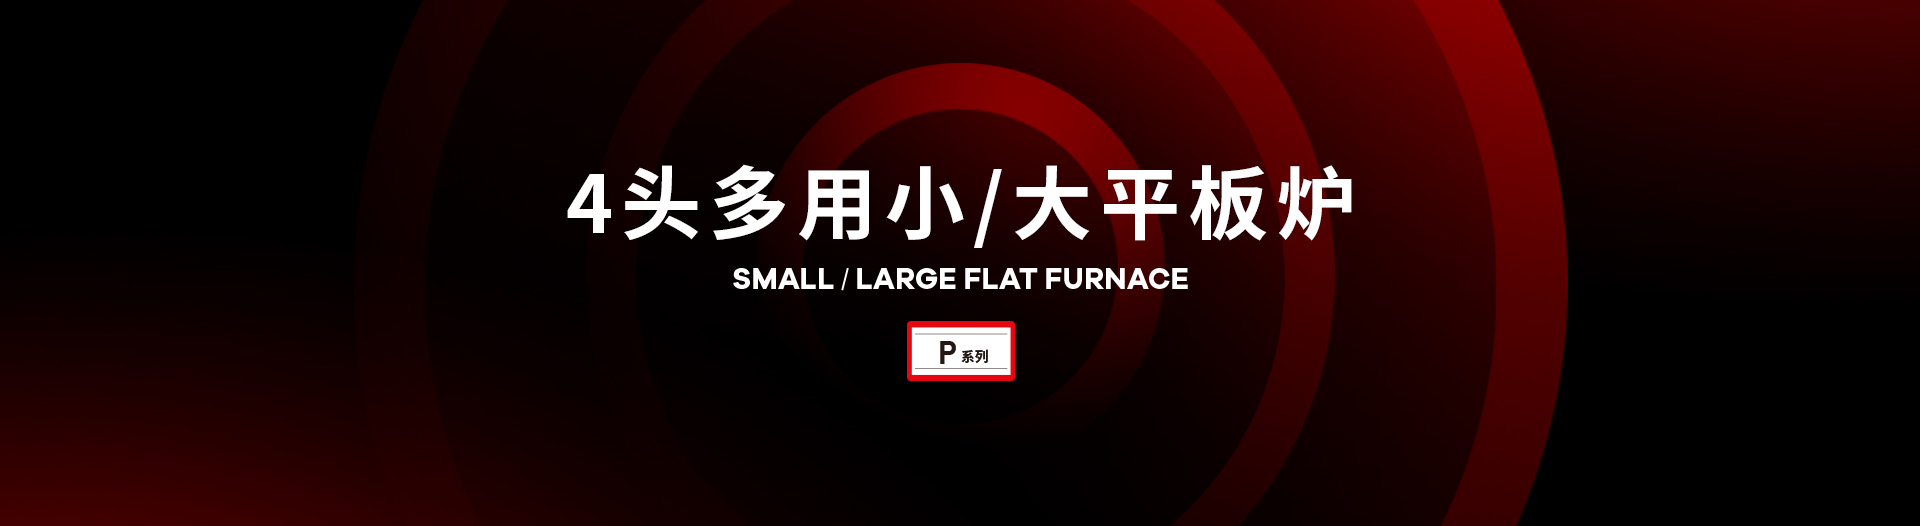 sinswey_engineering_product_small_large_flat_furnace_banner.jpg